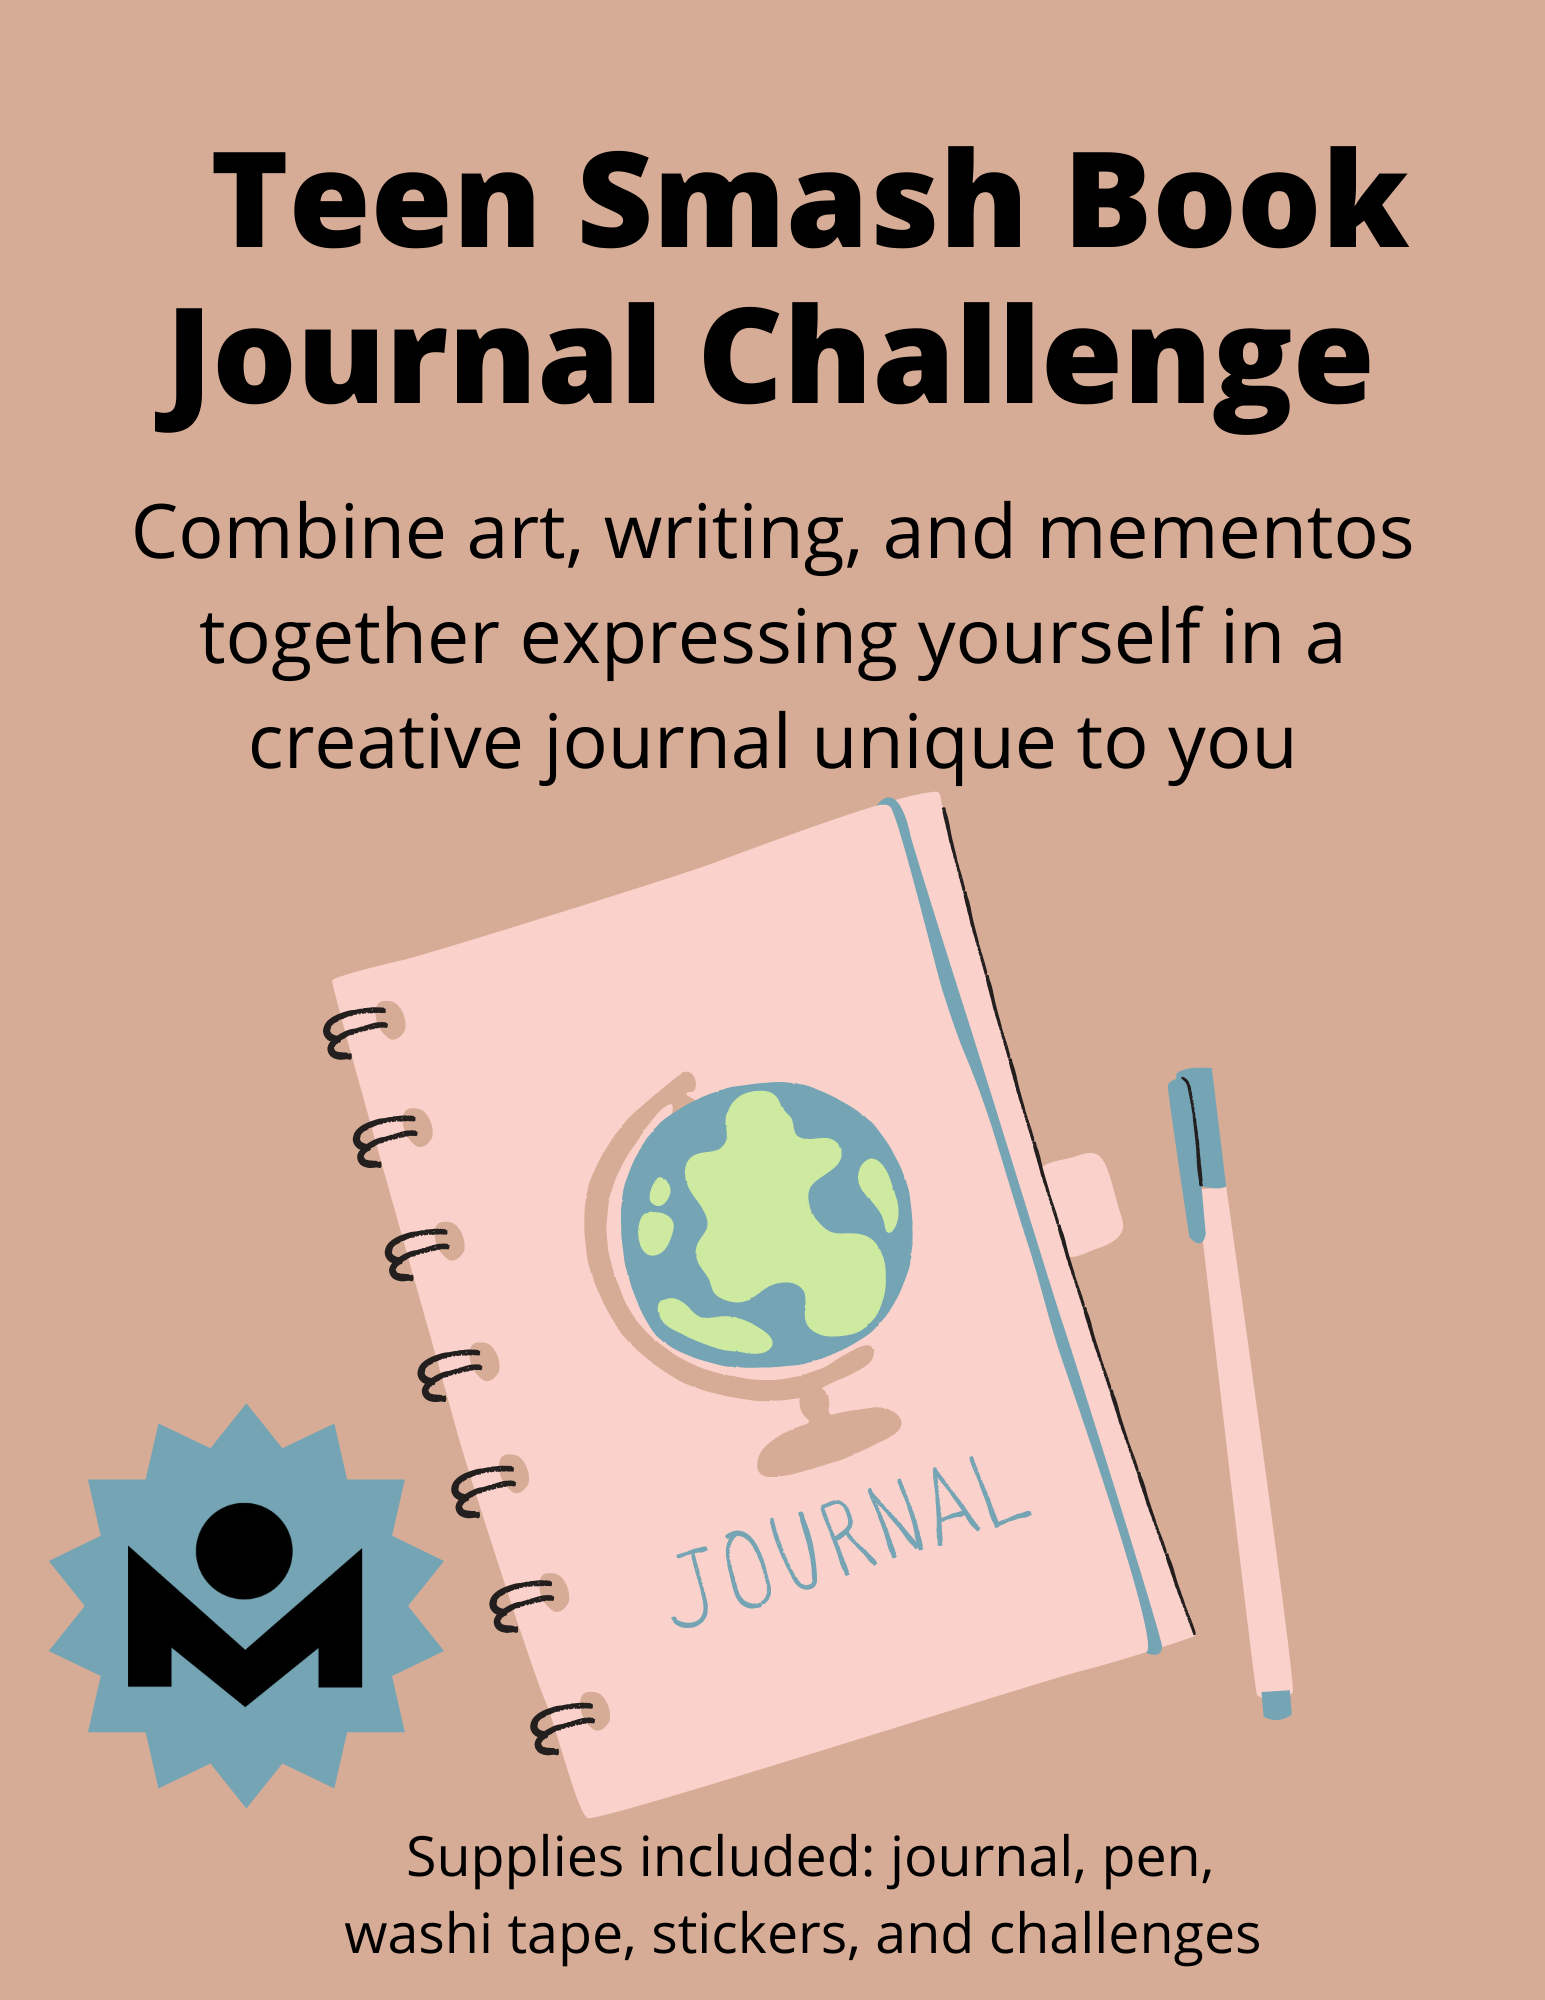 Picture of a journal and pen with kit description